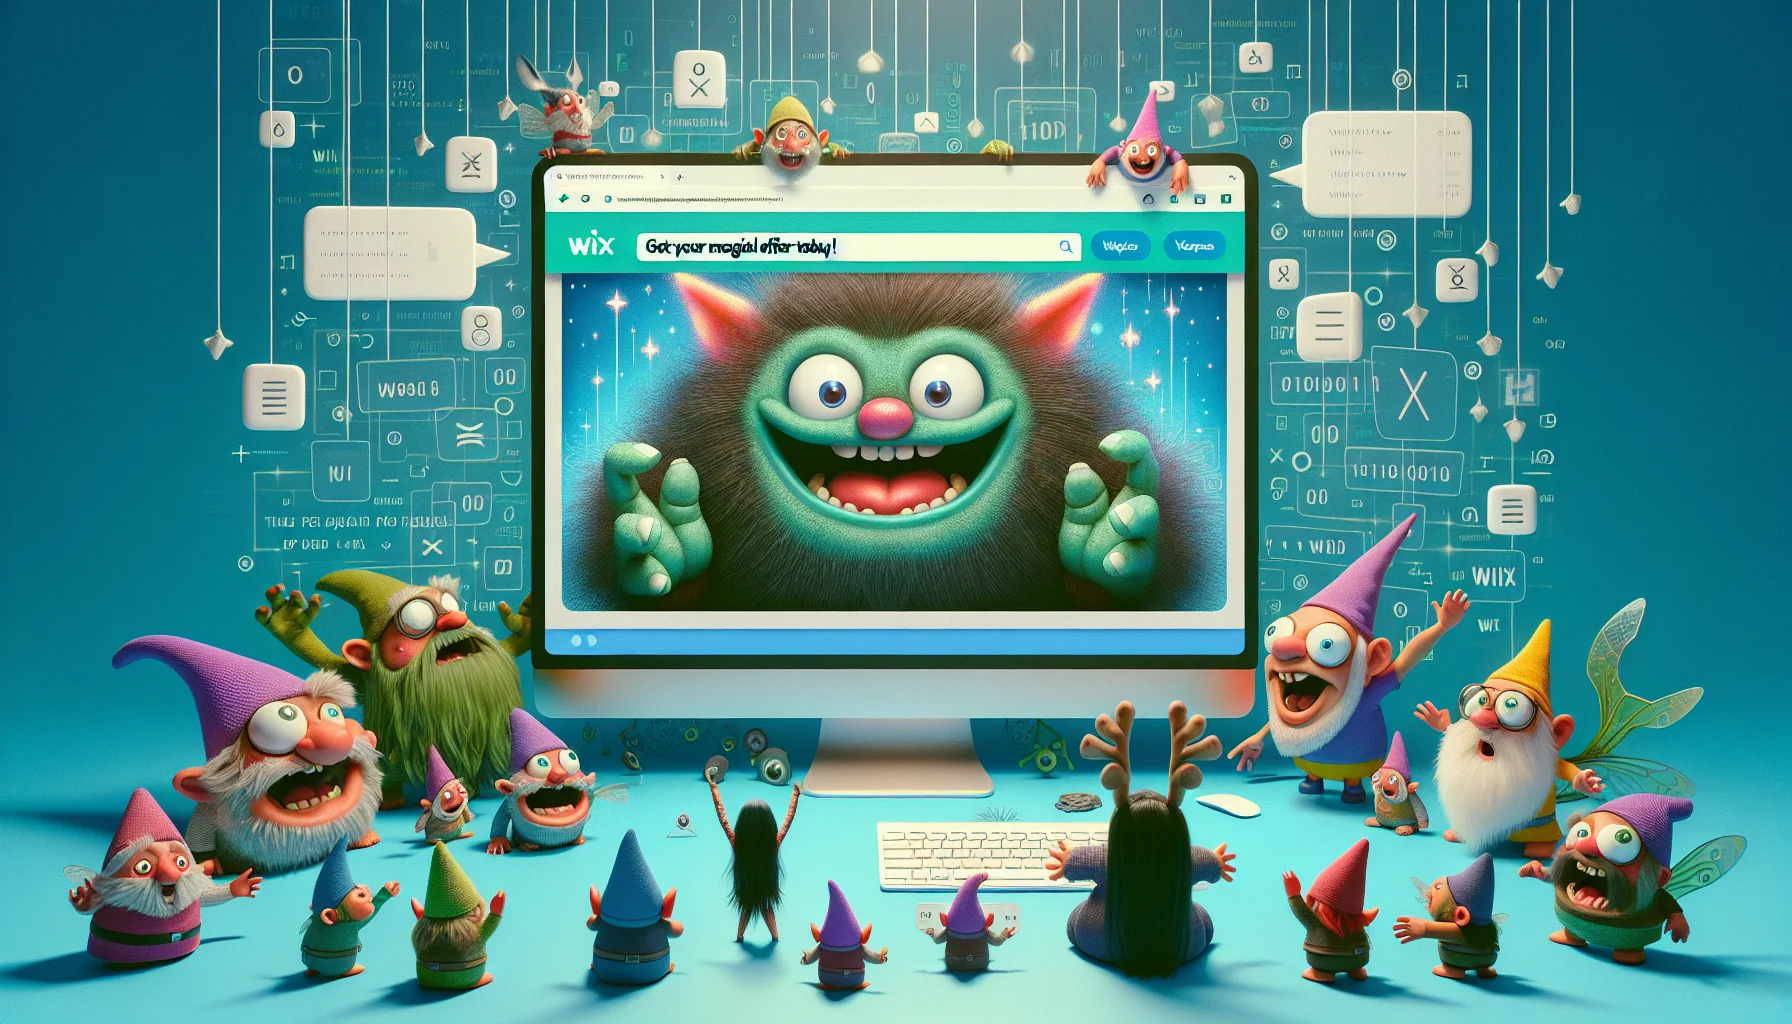 Create a humorous image highlighting a fantastical situation where quirky characters are using a giant virtual screen to program a pop-up on a Wix website. These characters could be whimsical creatures like gnomes or fairies. Make sure to illustrate the Wix interface distinctly and show exaggeratedly positive reactions to the ease of use in web hosting via Wix. The pop-up message should say 'Get your magical offer today!'. Also, it would be interesting if the background is filled with abstract internet symbols and binary code streams to further emphasize the web hosting theme.